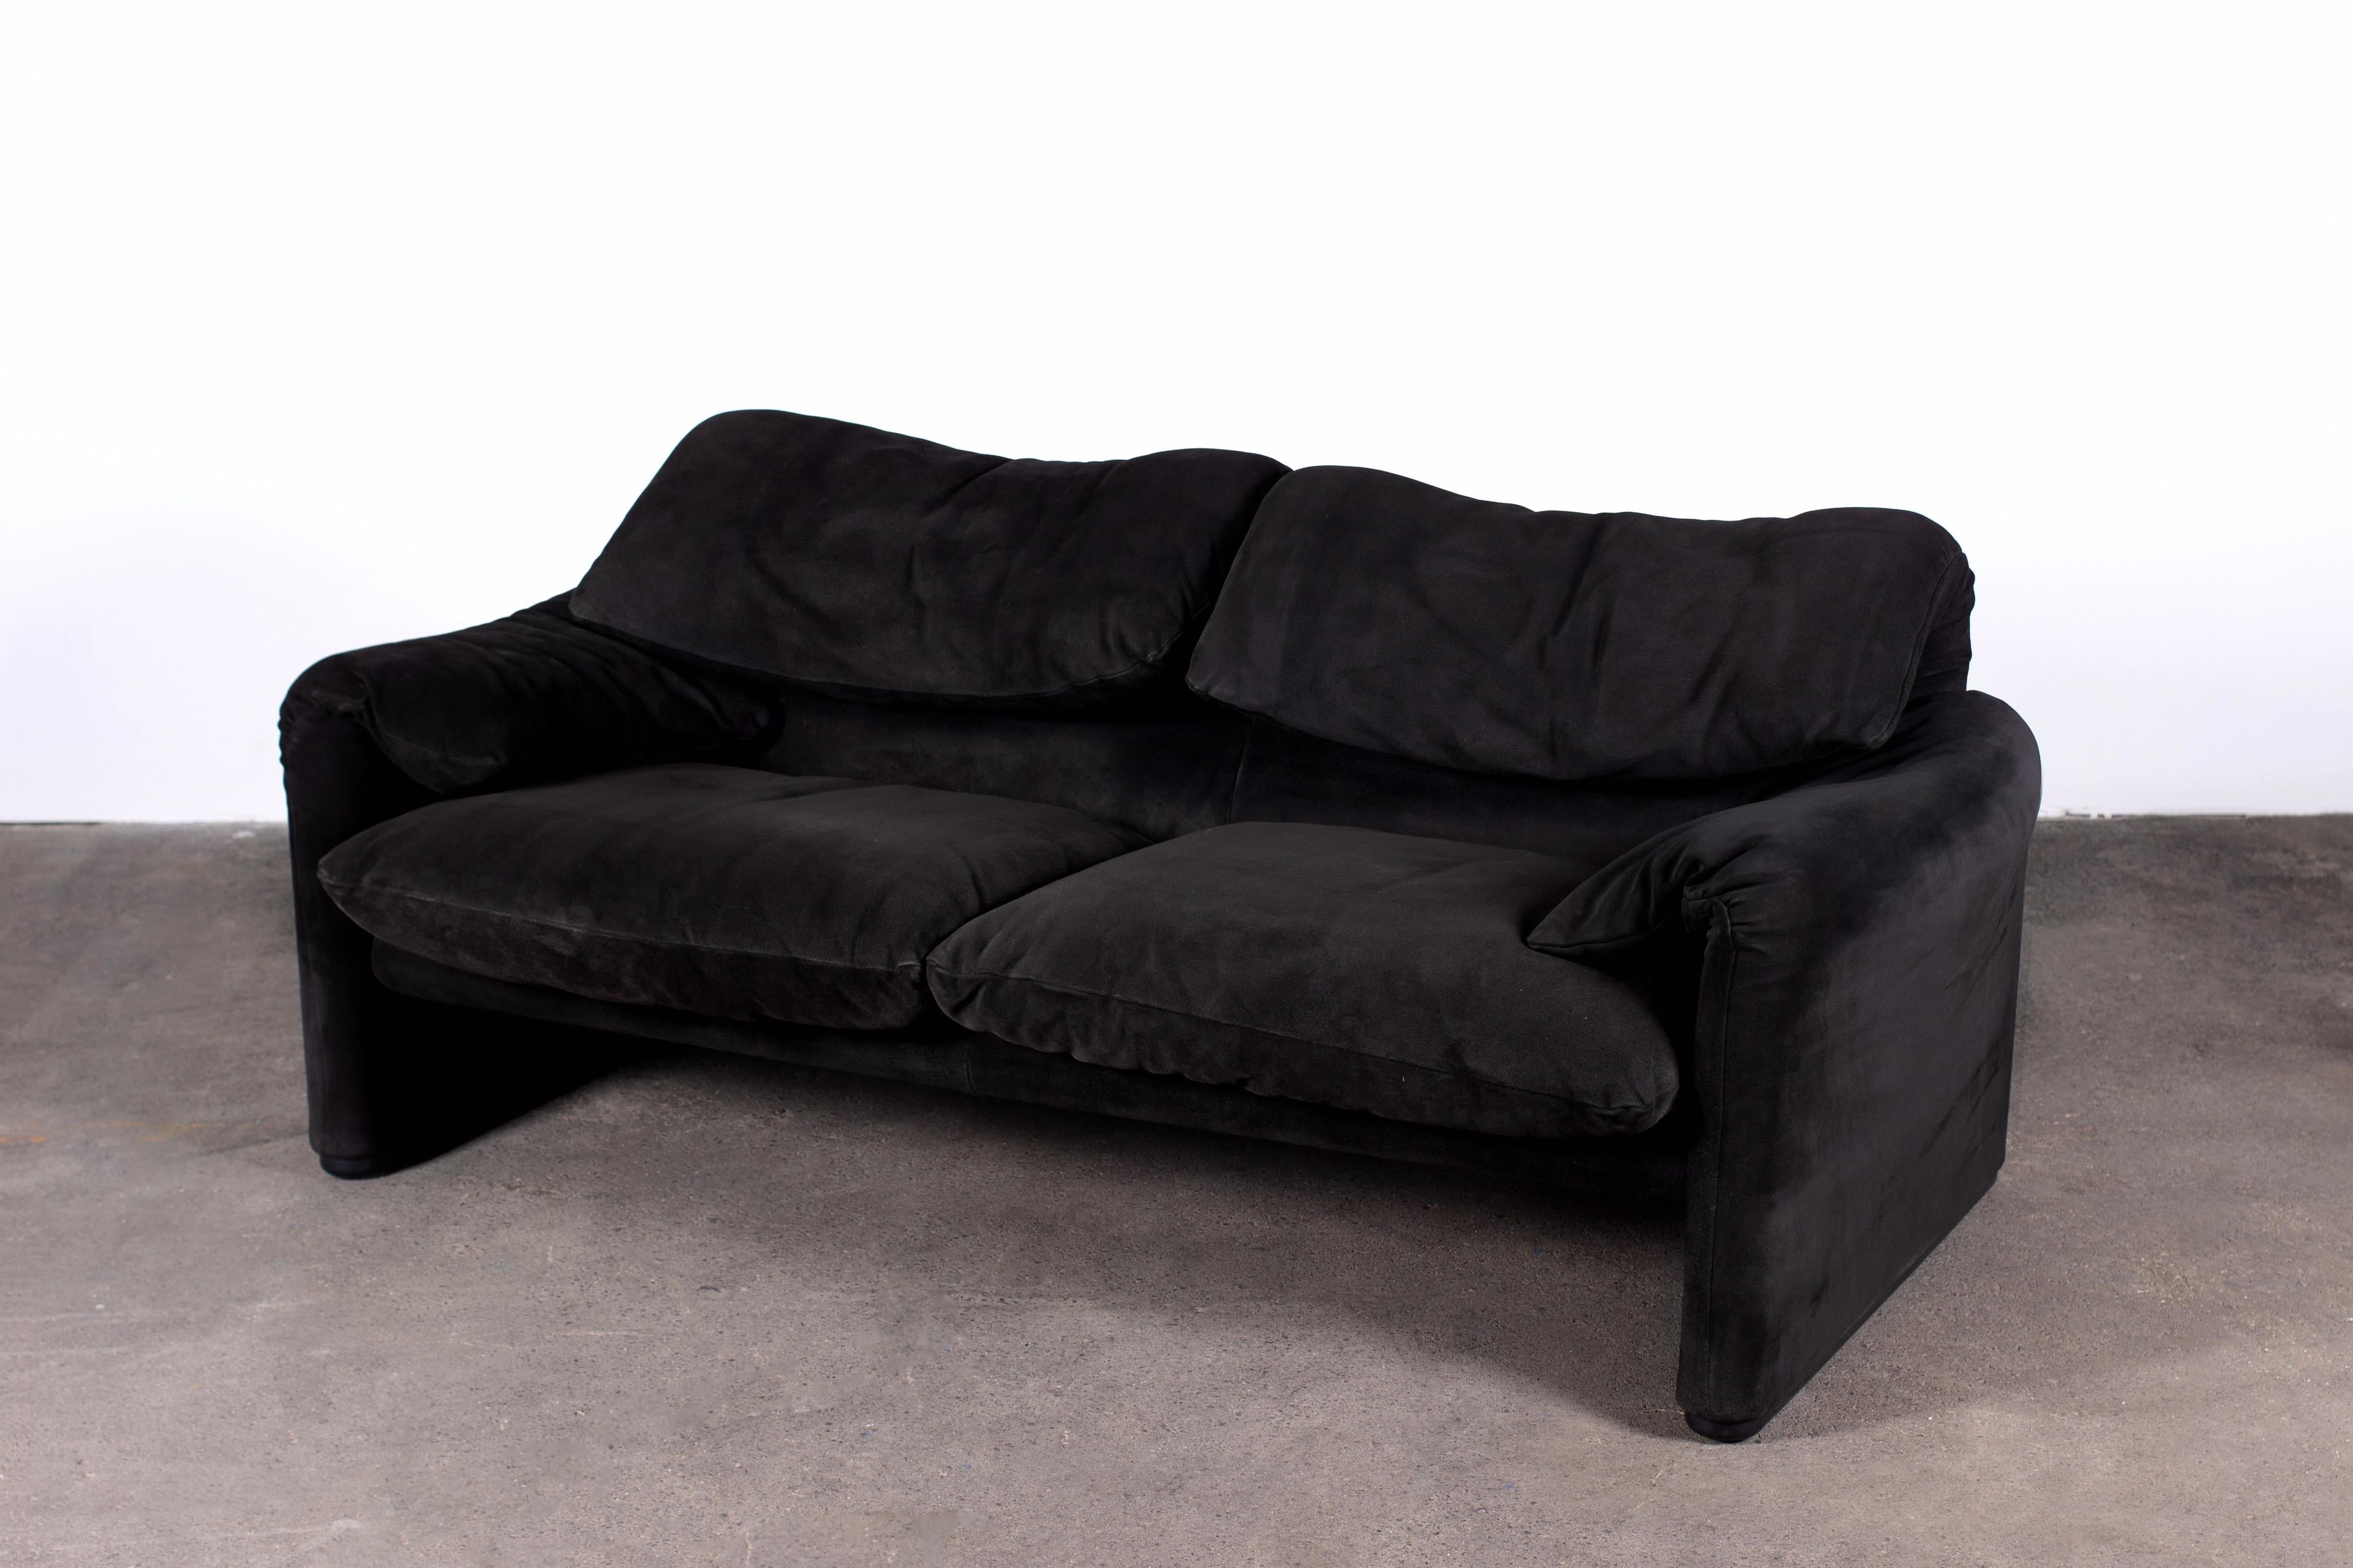 Pair of Black Suede 2-Seater Maralunga Sofas by Vico Magistretti for Cassina 10